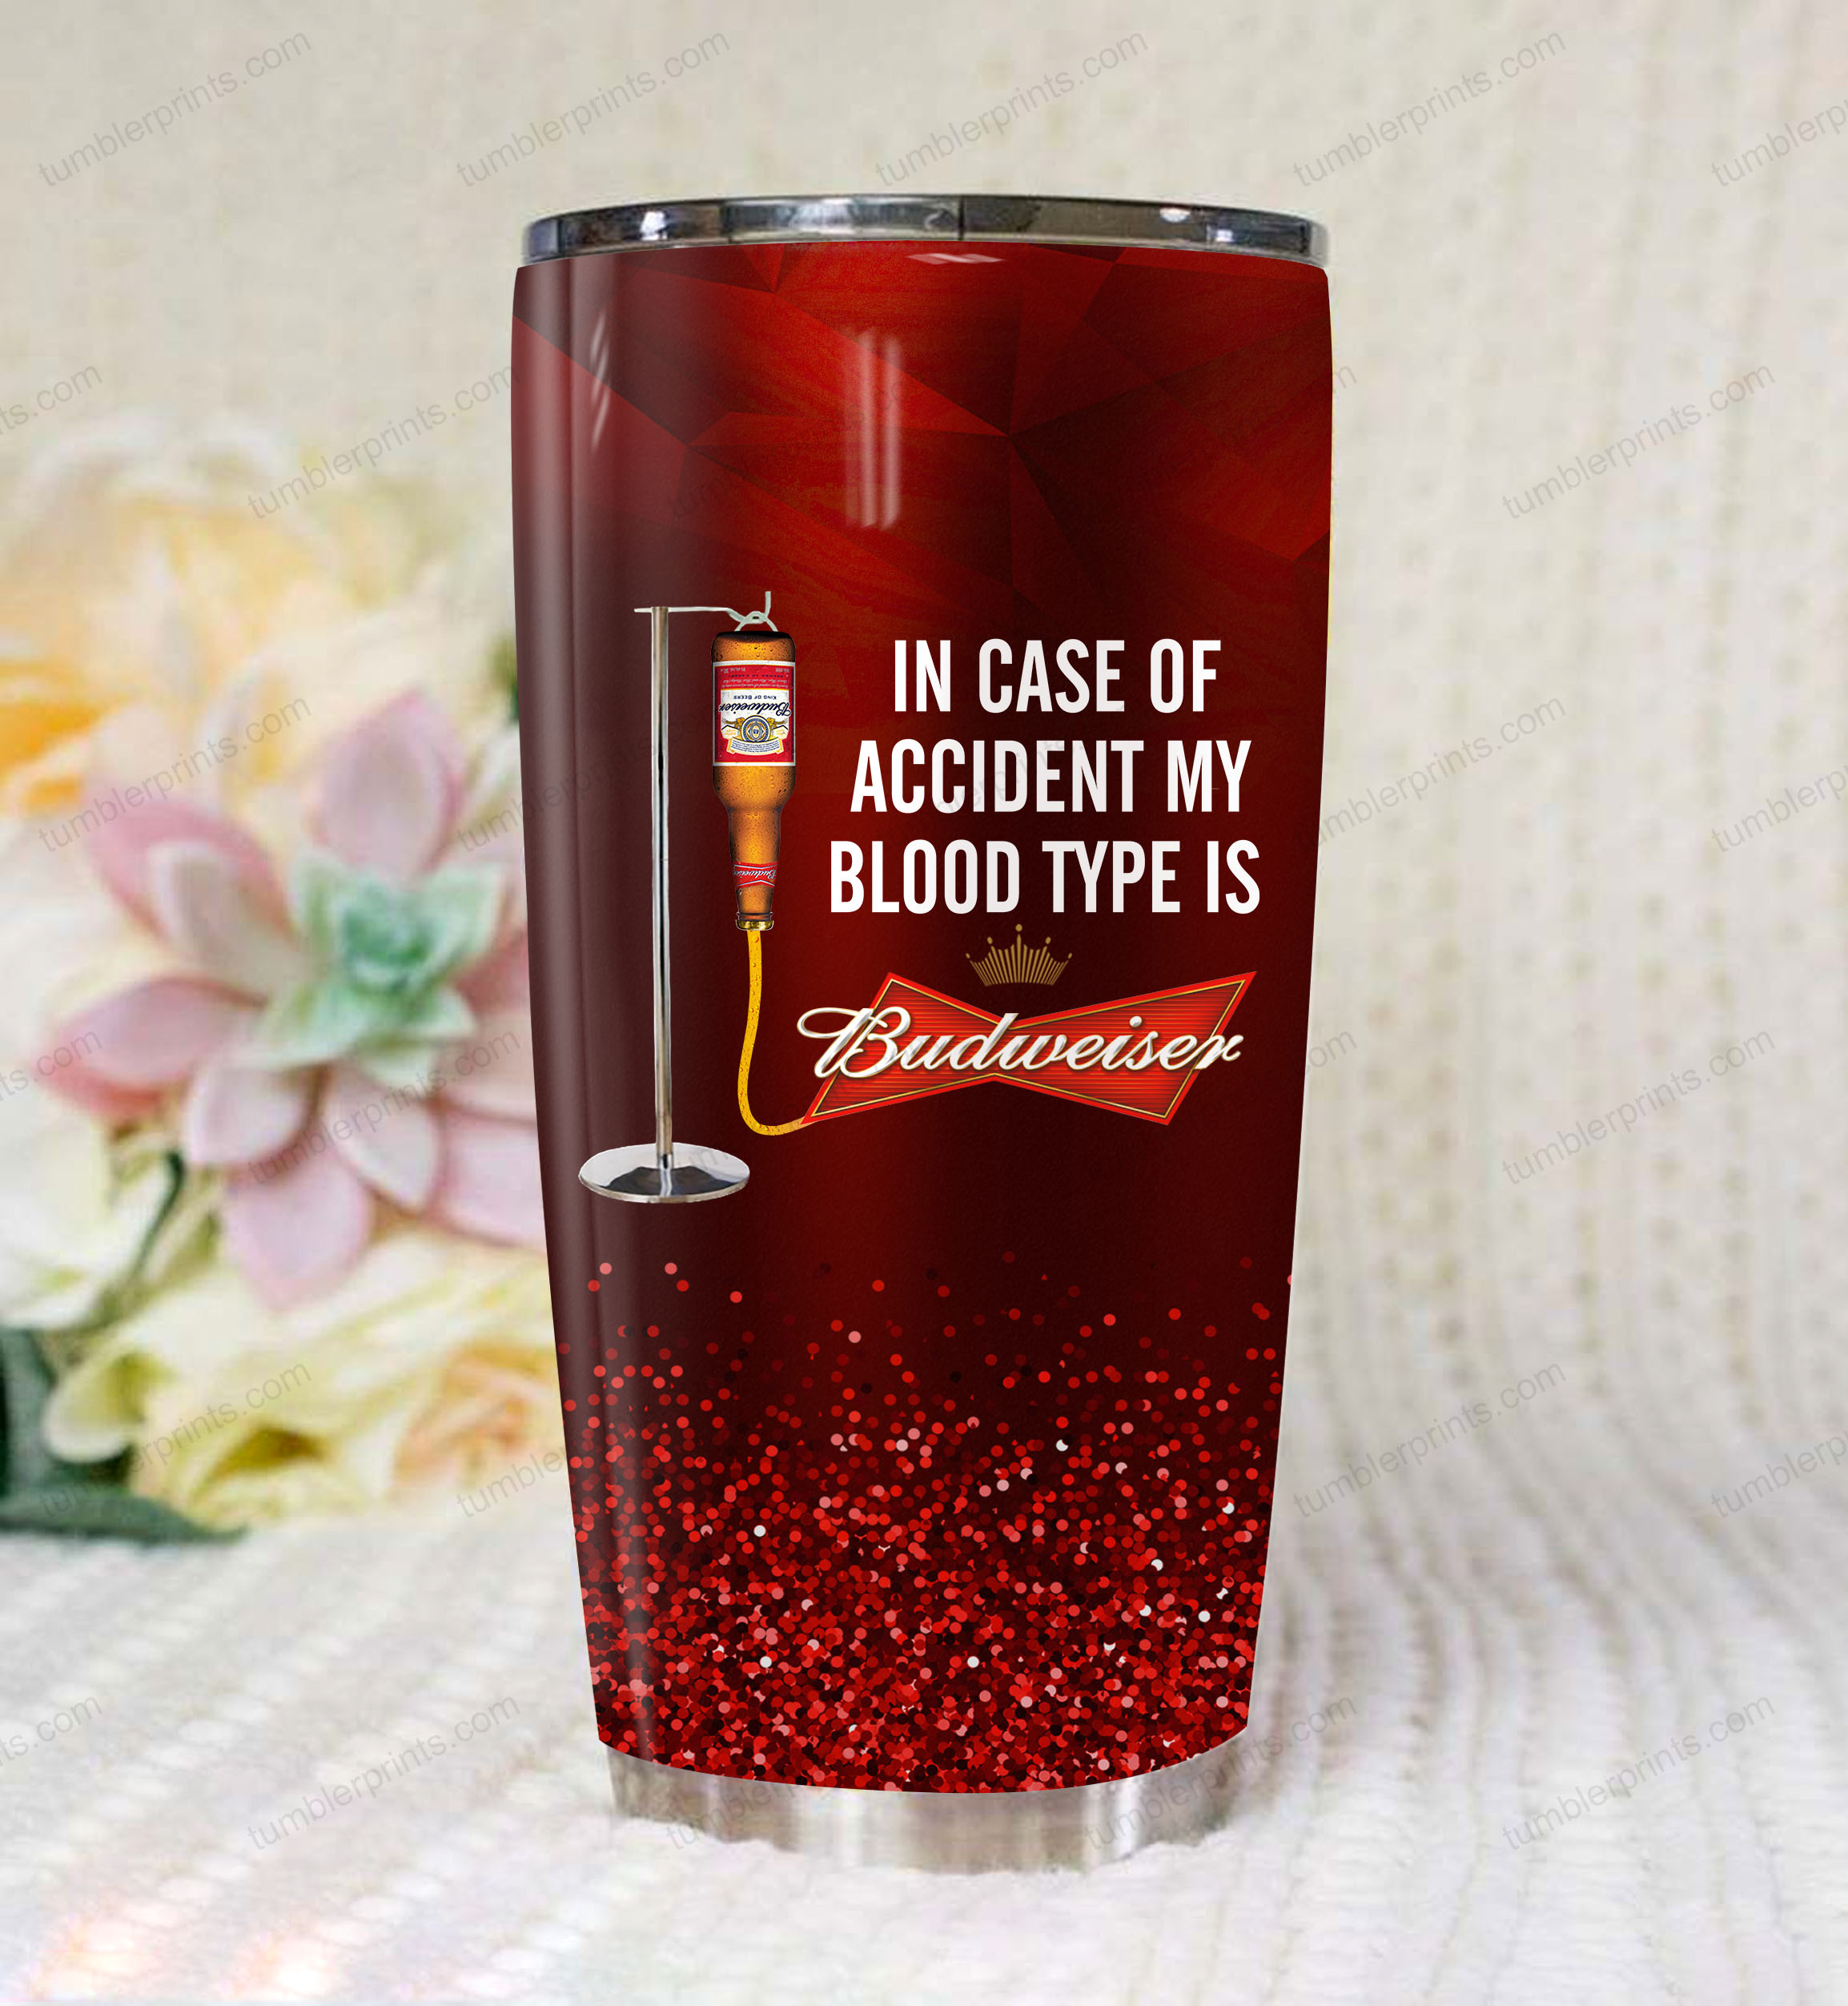 In case of an accident my blood type is budweiser full printing tumbler 1